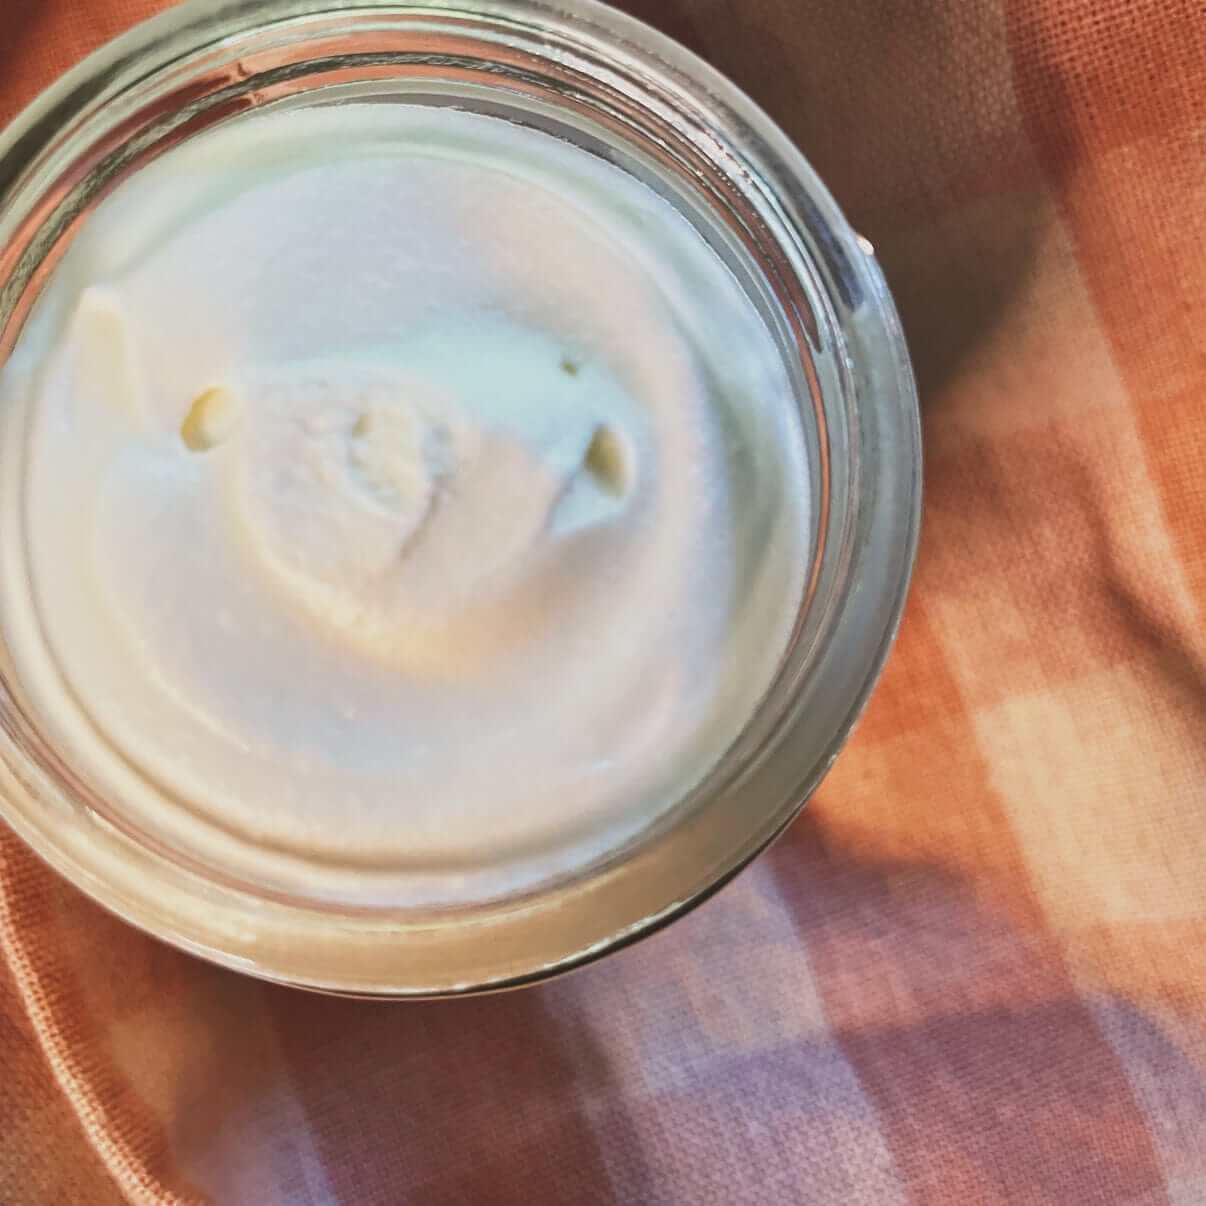 Whipped Tallow Balm/Body Butter Lotion - Grass-Fed, Organic Palm & Pine Apothecary Skin Care - Conners Clinic